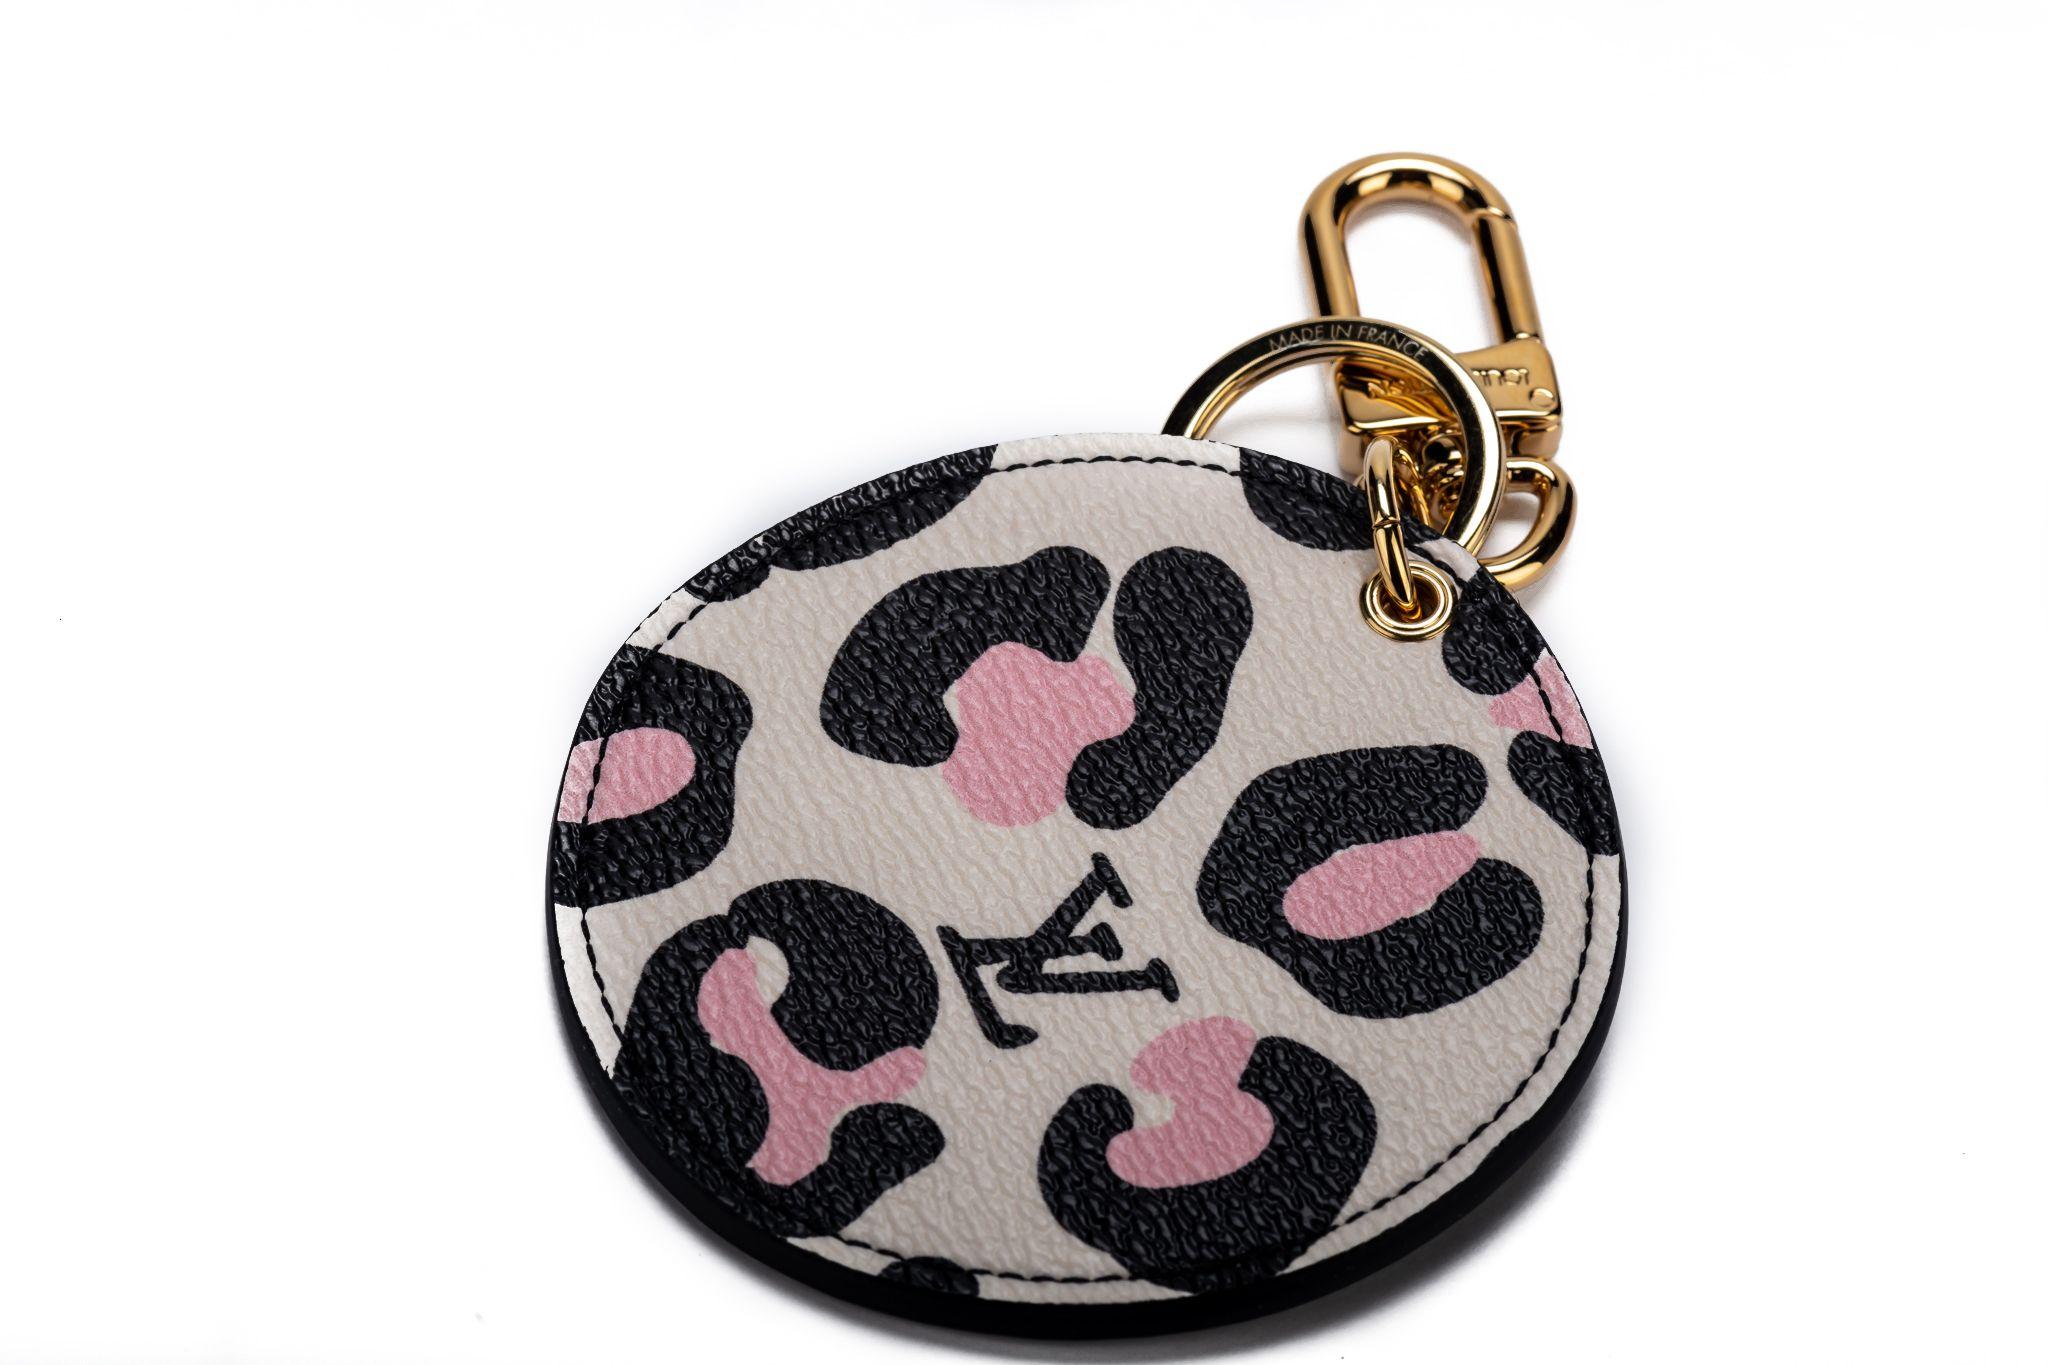 This Wild at Heart Illustre bag charm and key holder has a free-spirited feel with the irregular round shape of its hanging canvas medallion. This medallion is brightly decorated with a Monogram Flower on one side and leopard spots and the LV